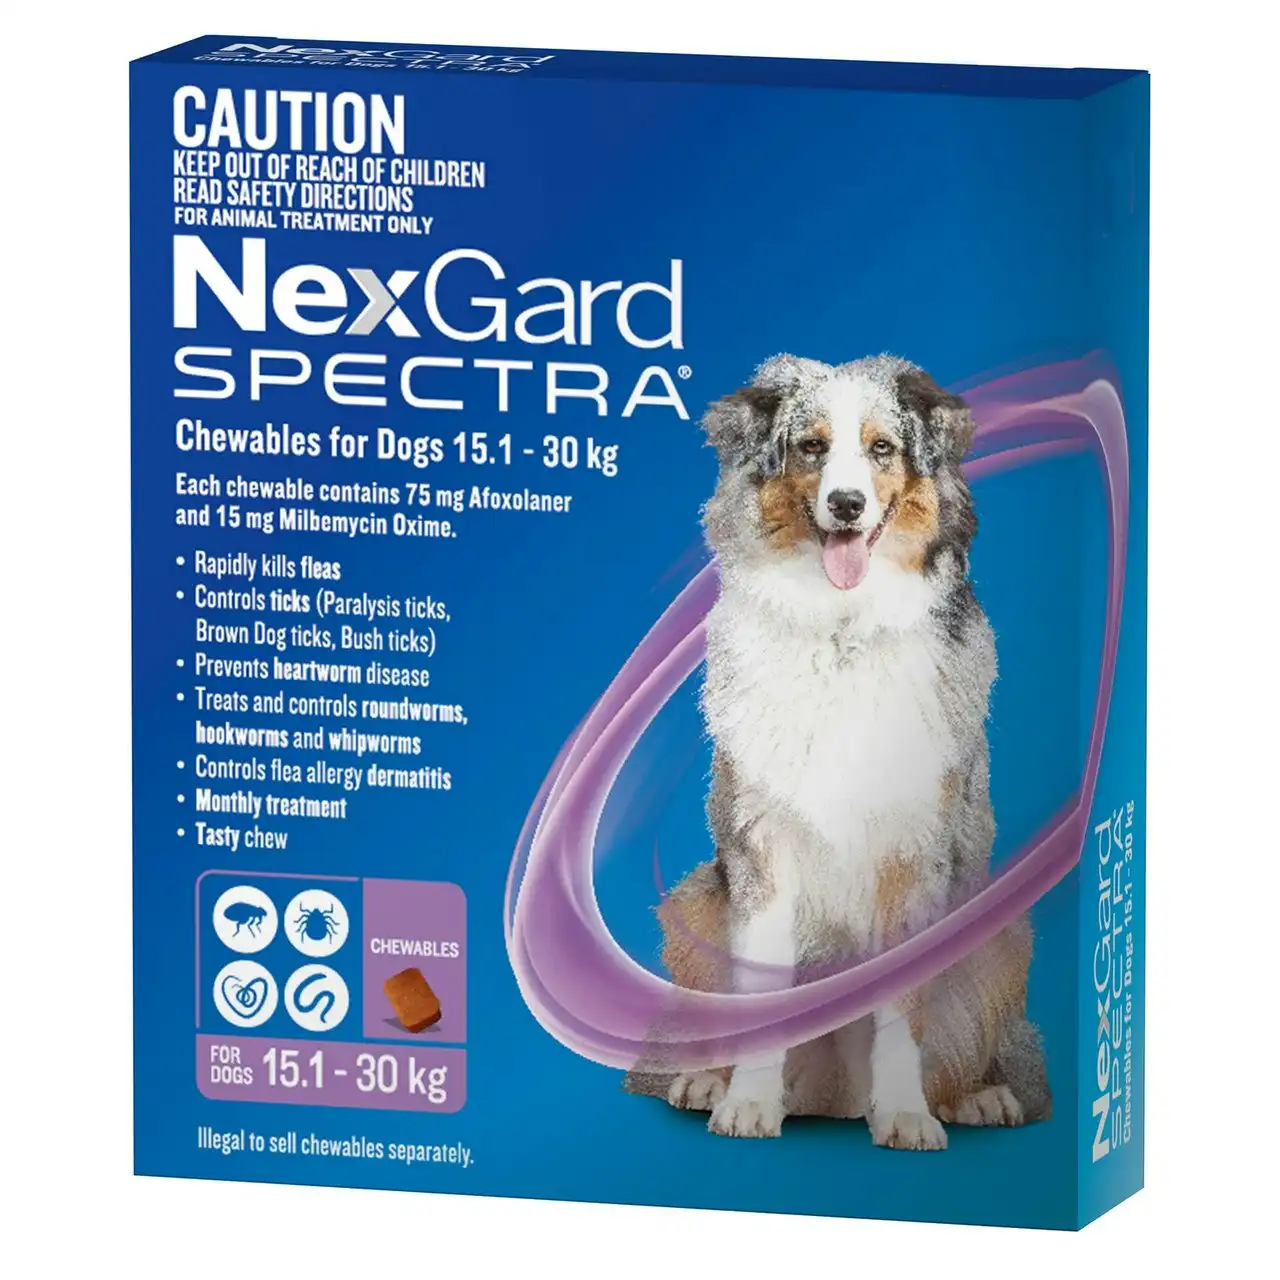 Nexgard Spectra Chewables For Dogs 15.1 - 30kg 3 Pack